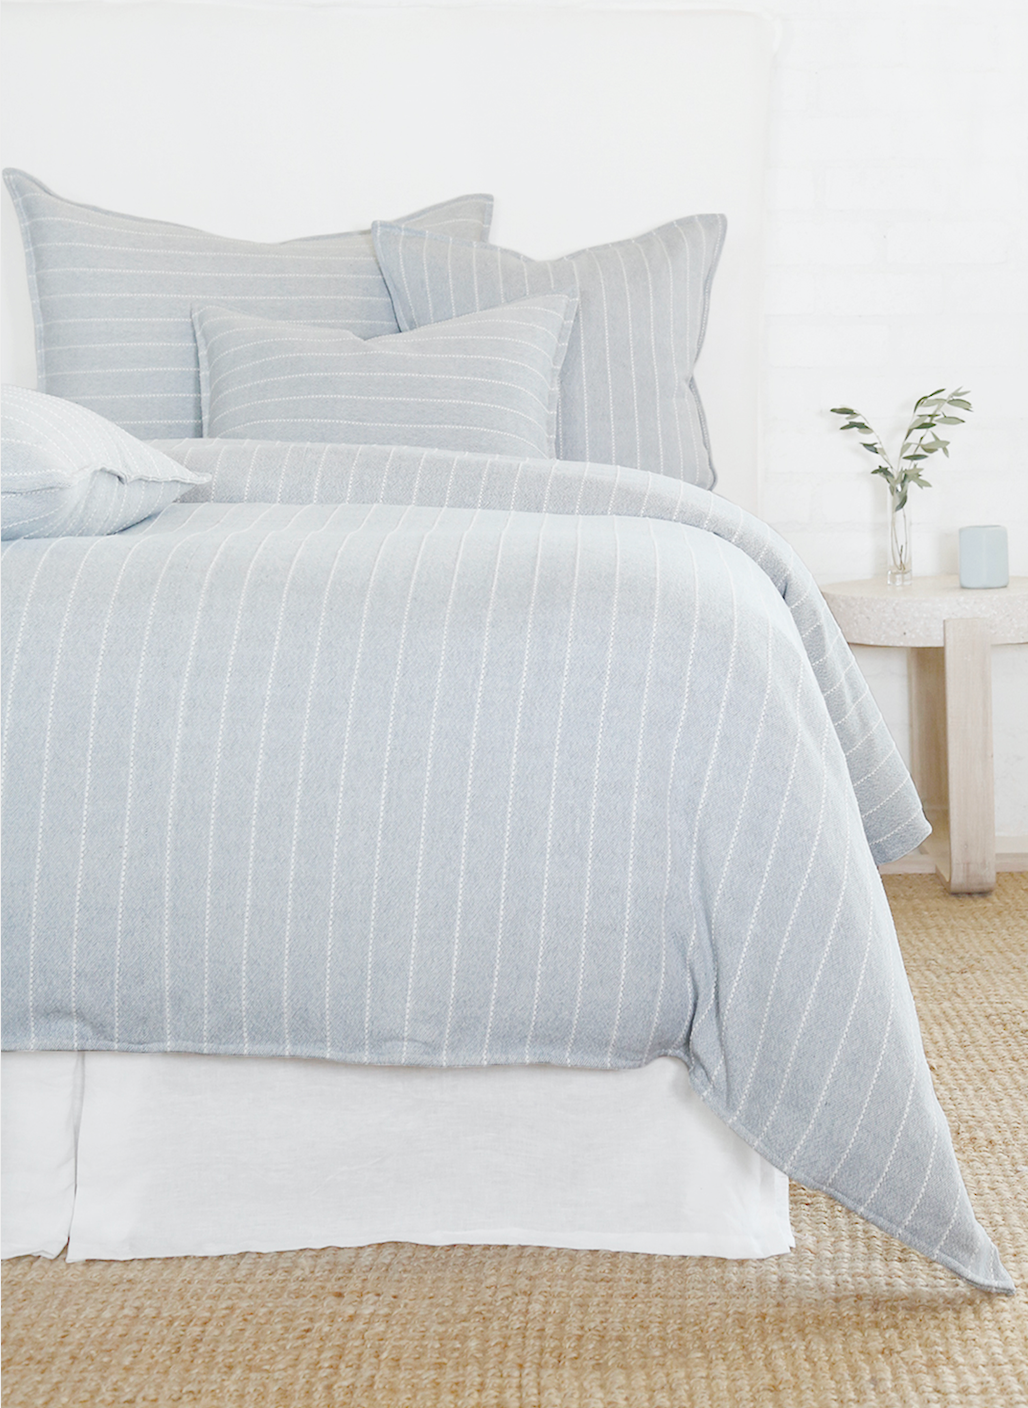 Light blue striped bedding on a bed